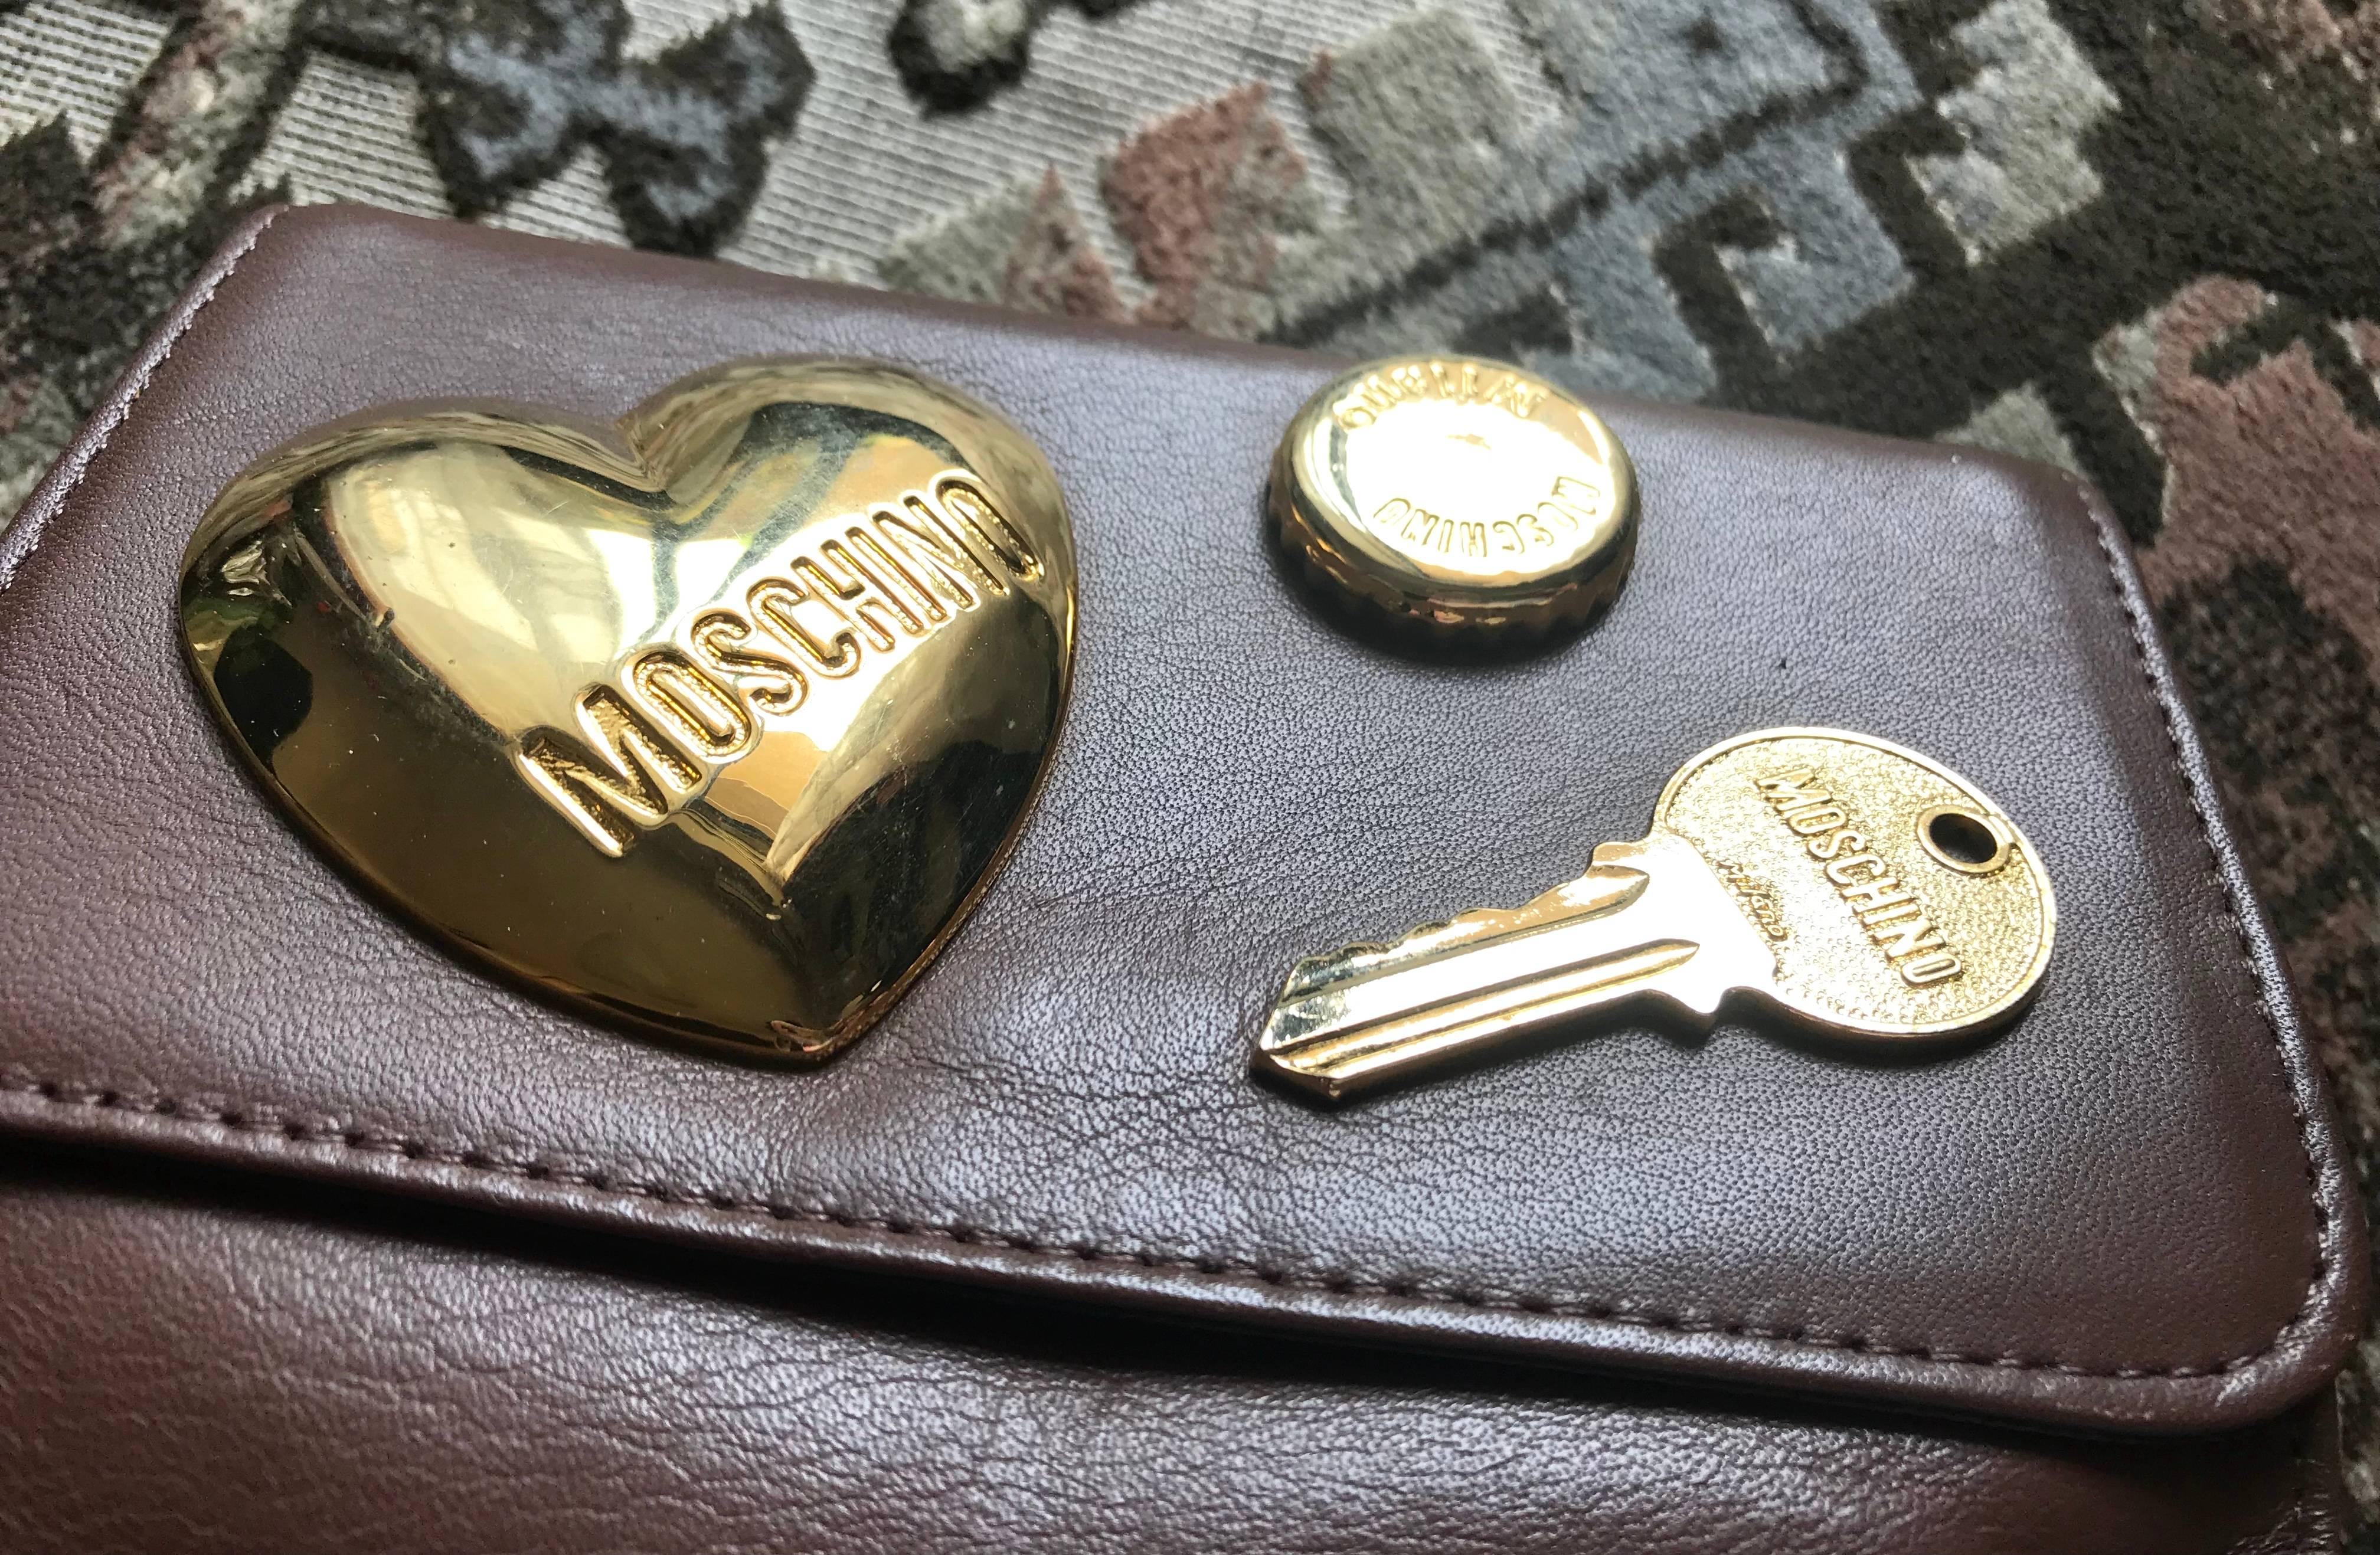 ***This is pouch only. No belt.***
Vintage MOSCHINO chocolate brown leather clutch pouch with large golden heart and key motifs. With your own belt, it can be fanny pack. Chic and Mod.

This is a vintage MOSCHINO, cute shape chocolate brown leather